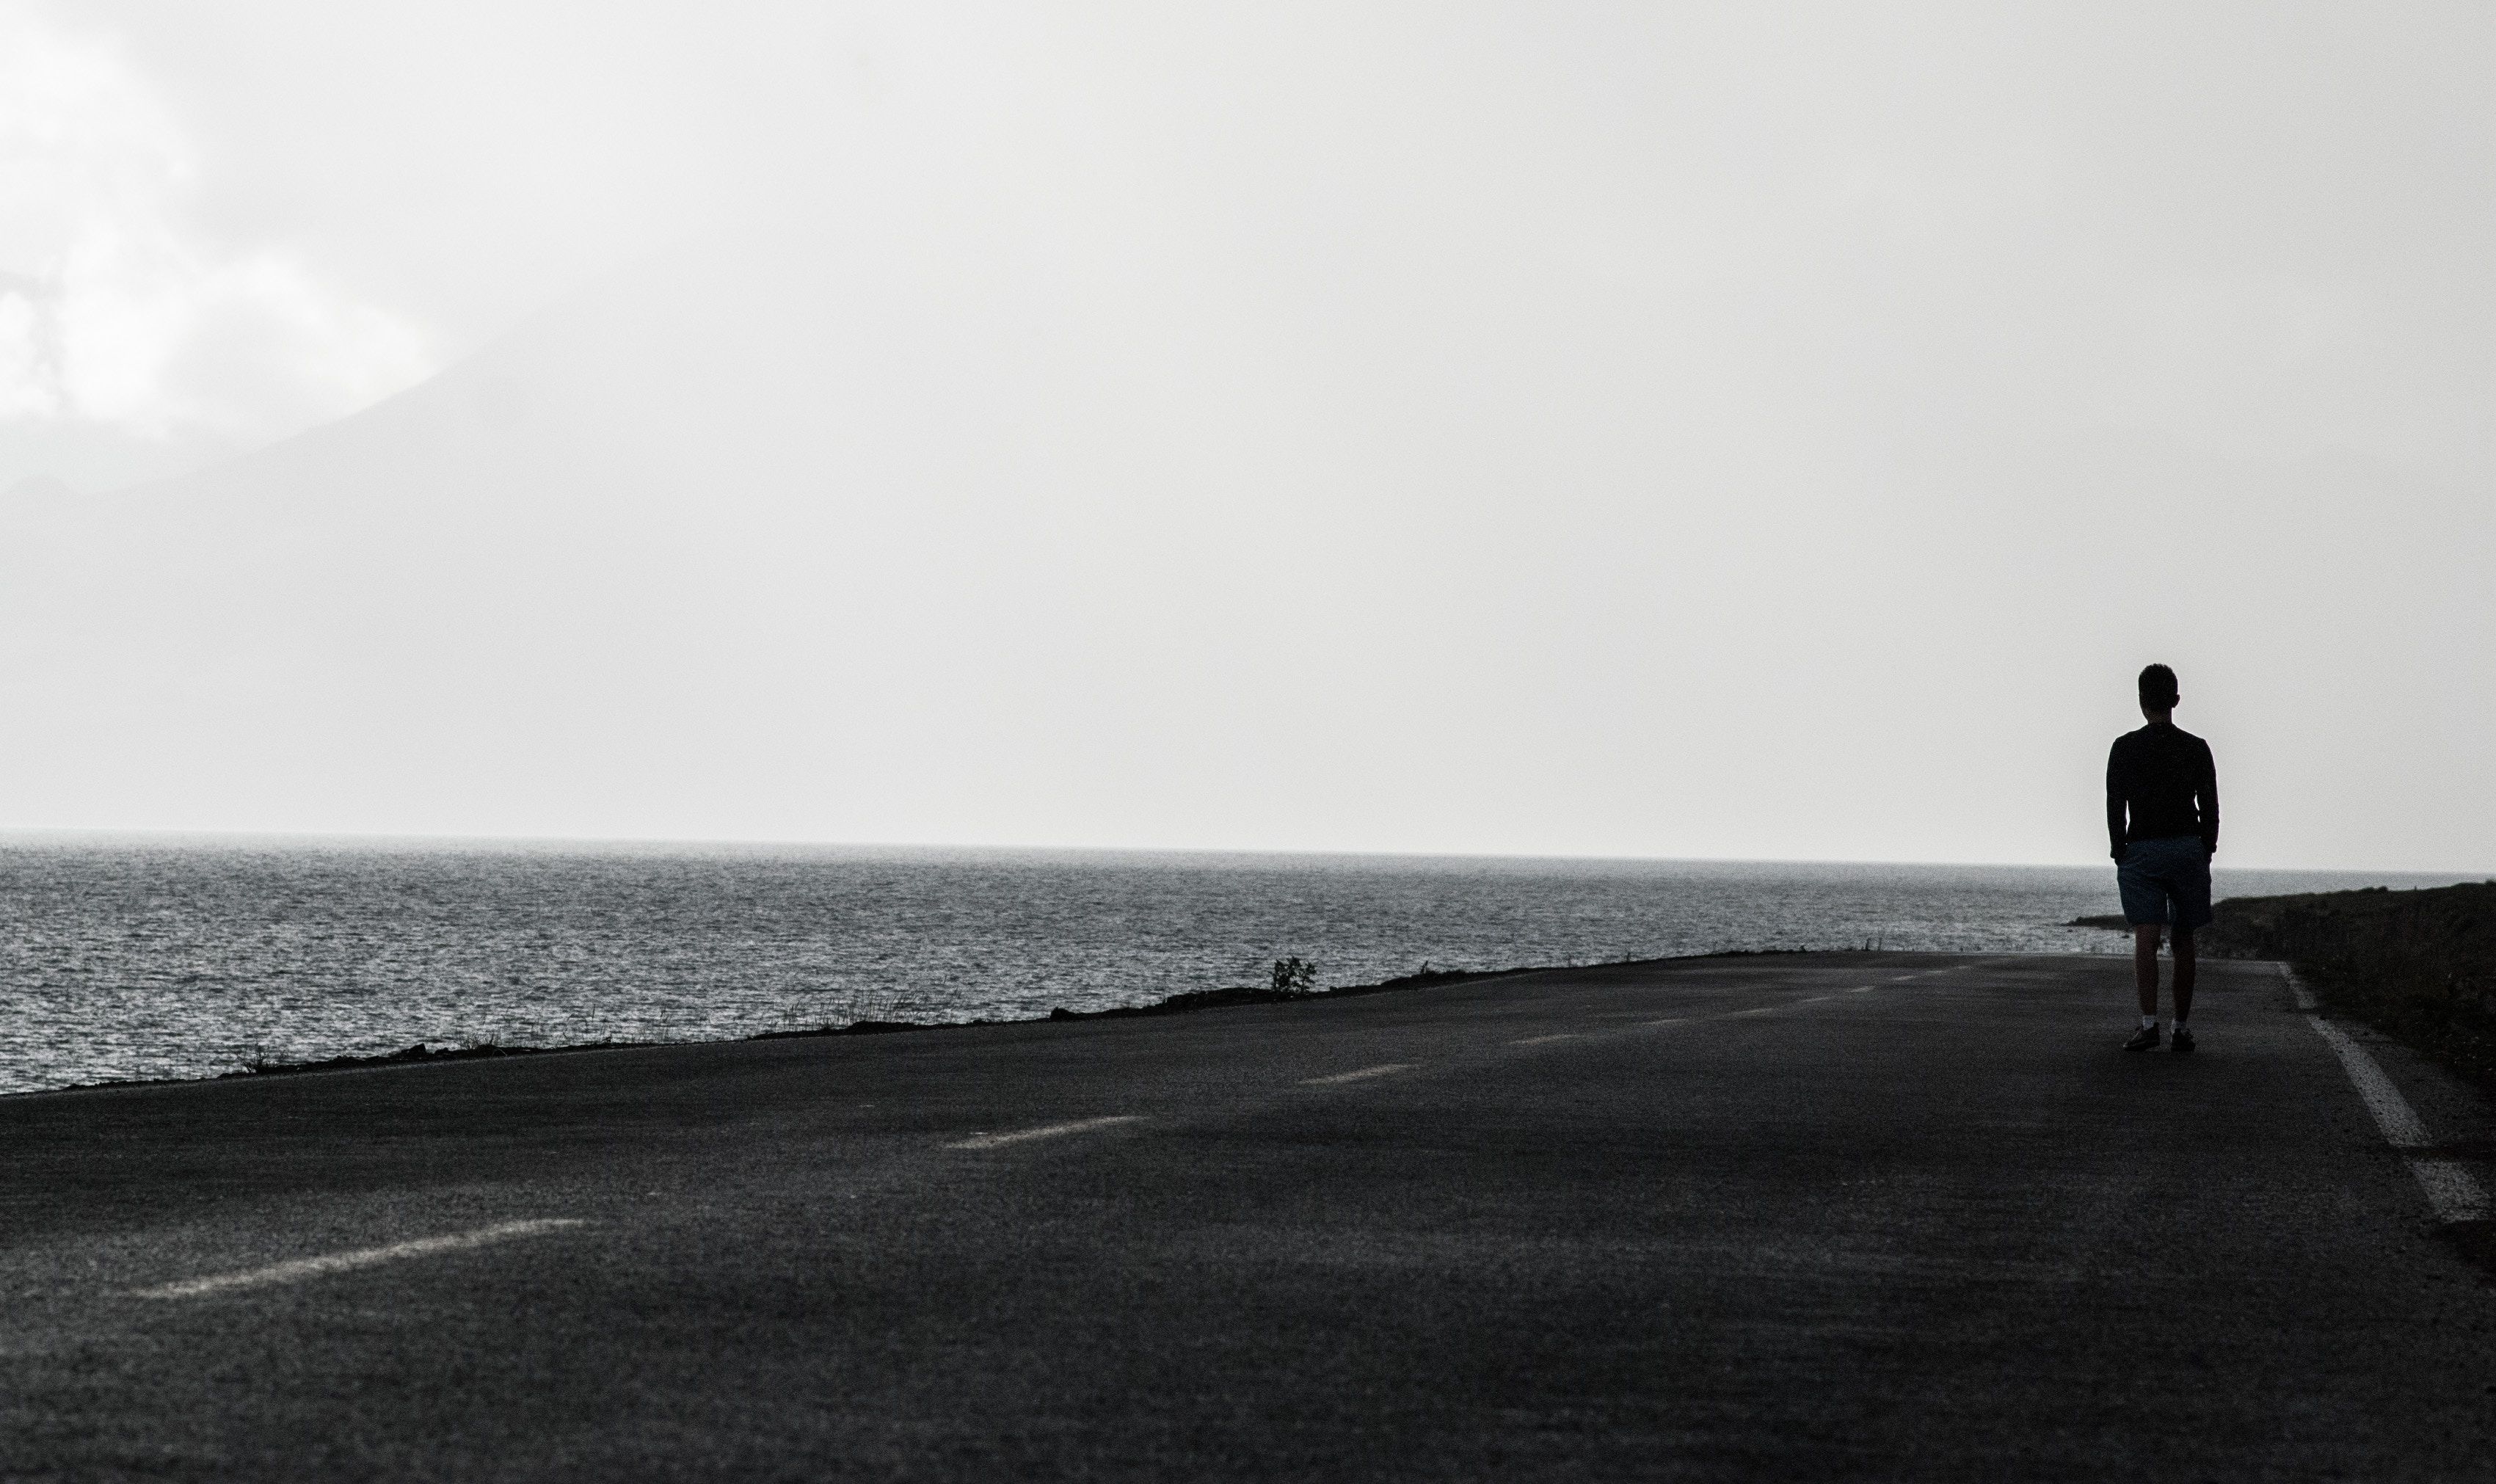 3401x2022 #con, #black and white, #sea, #water, #black wallpaper, #walk, #Free picture, #road, #loneliness, #space, #street, # wallpaper, #cloudy, #man, #alone, #think, #human, #contrast, #person, #black background, #ocean. Mocah HD